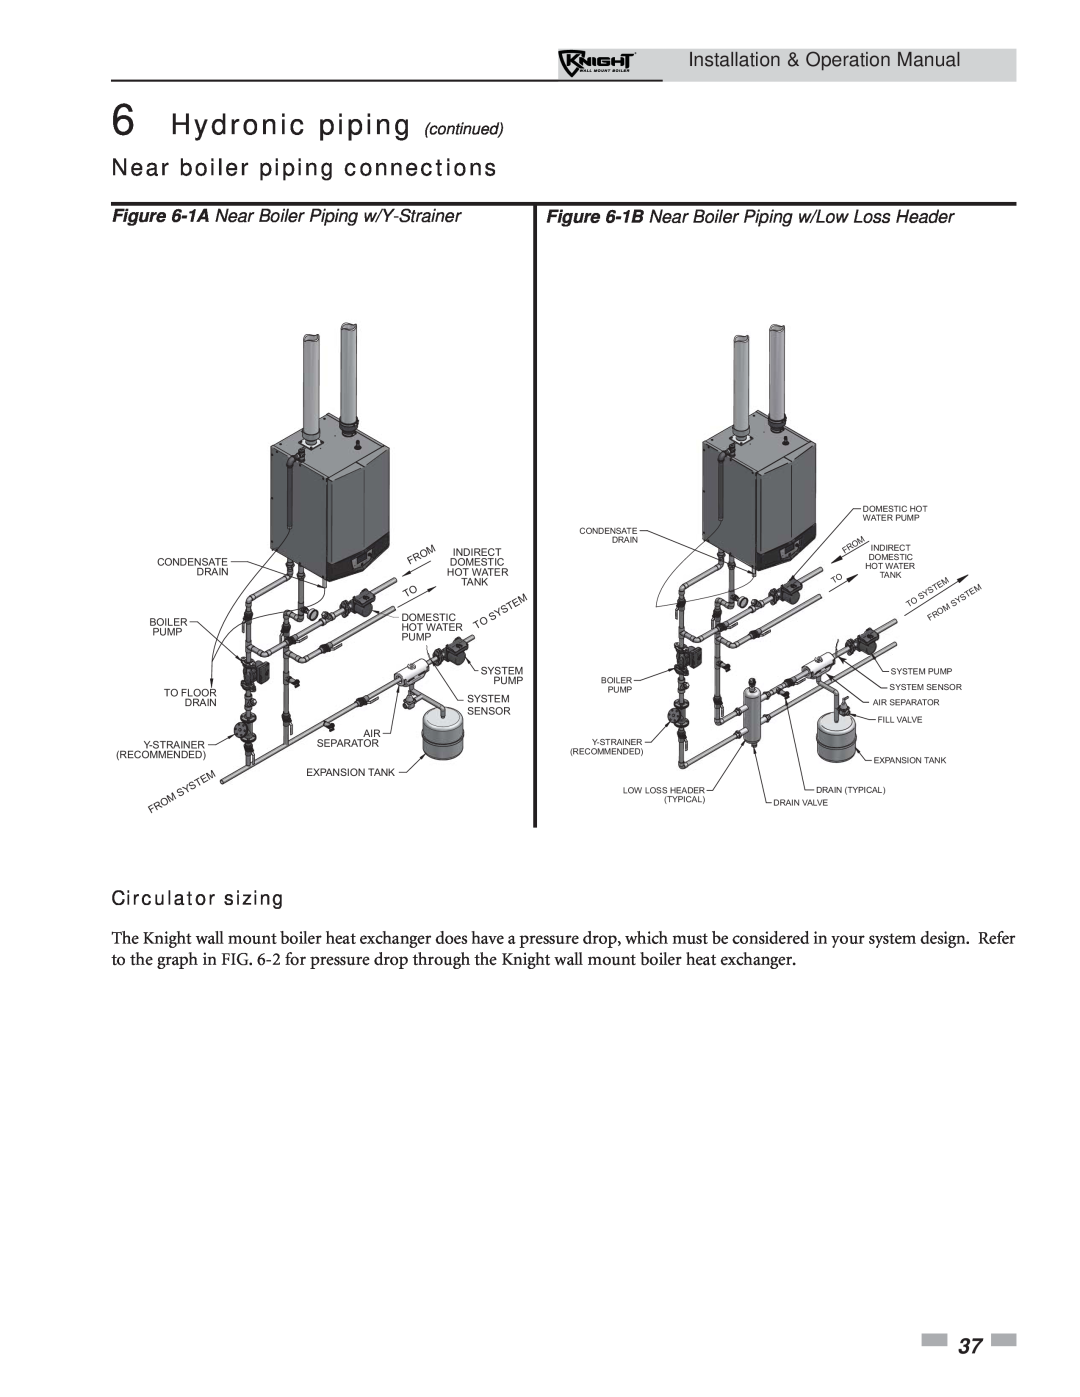 Lochinvar 51-211 operation manual Hydronic piping continued, Near boiler piping connections, Circulator sizing 